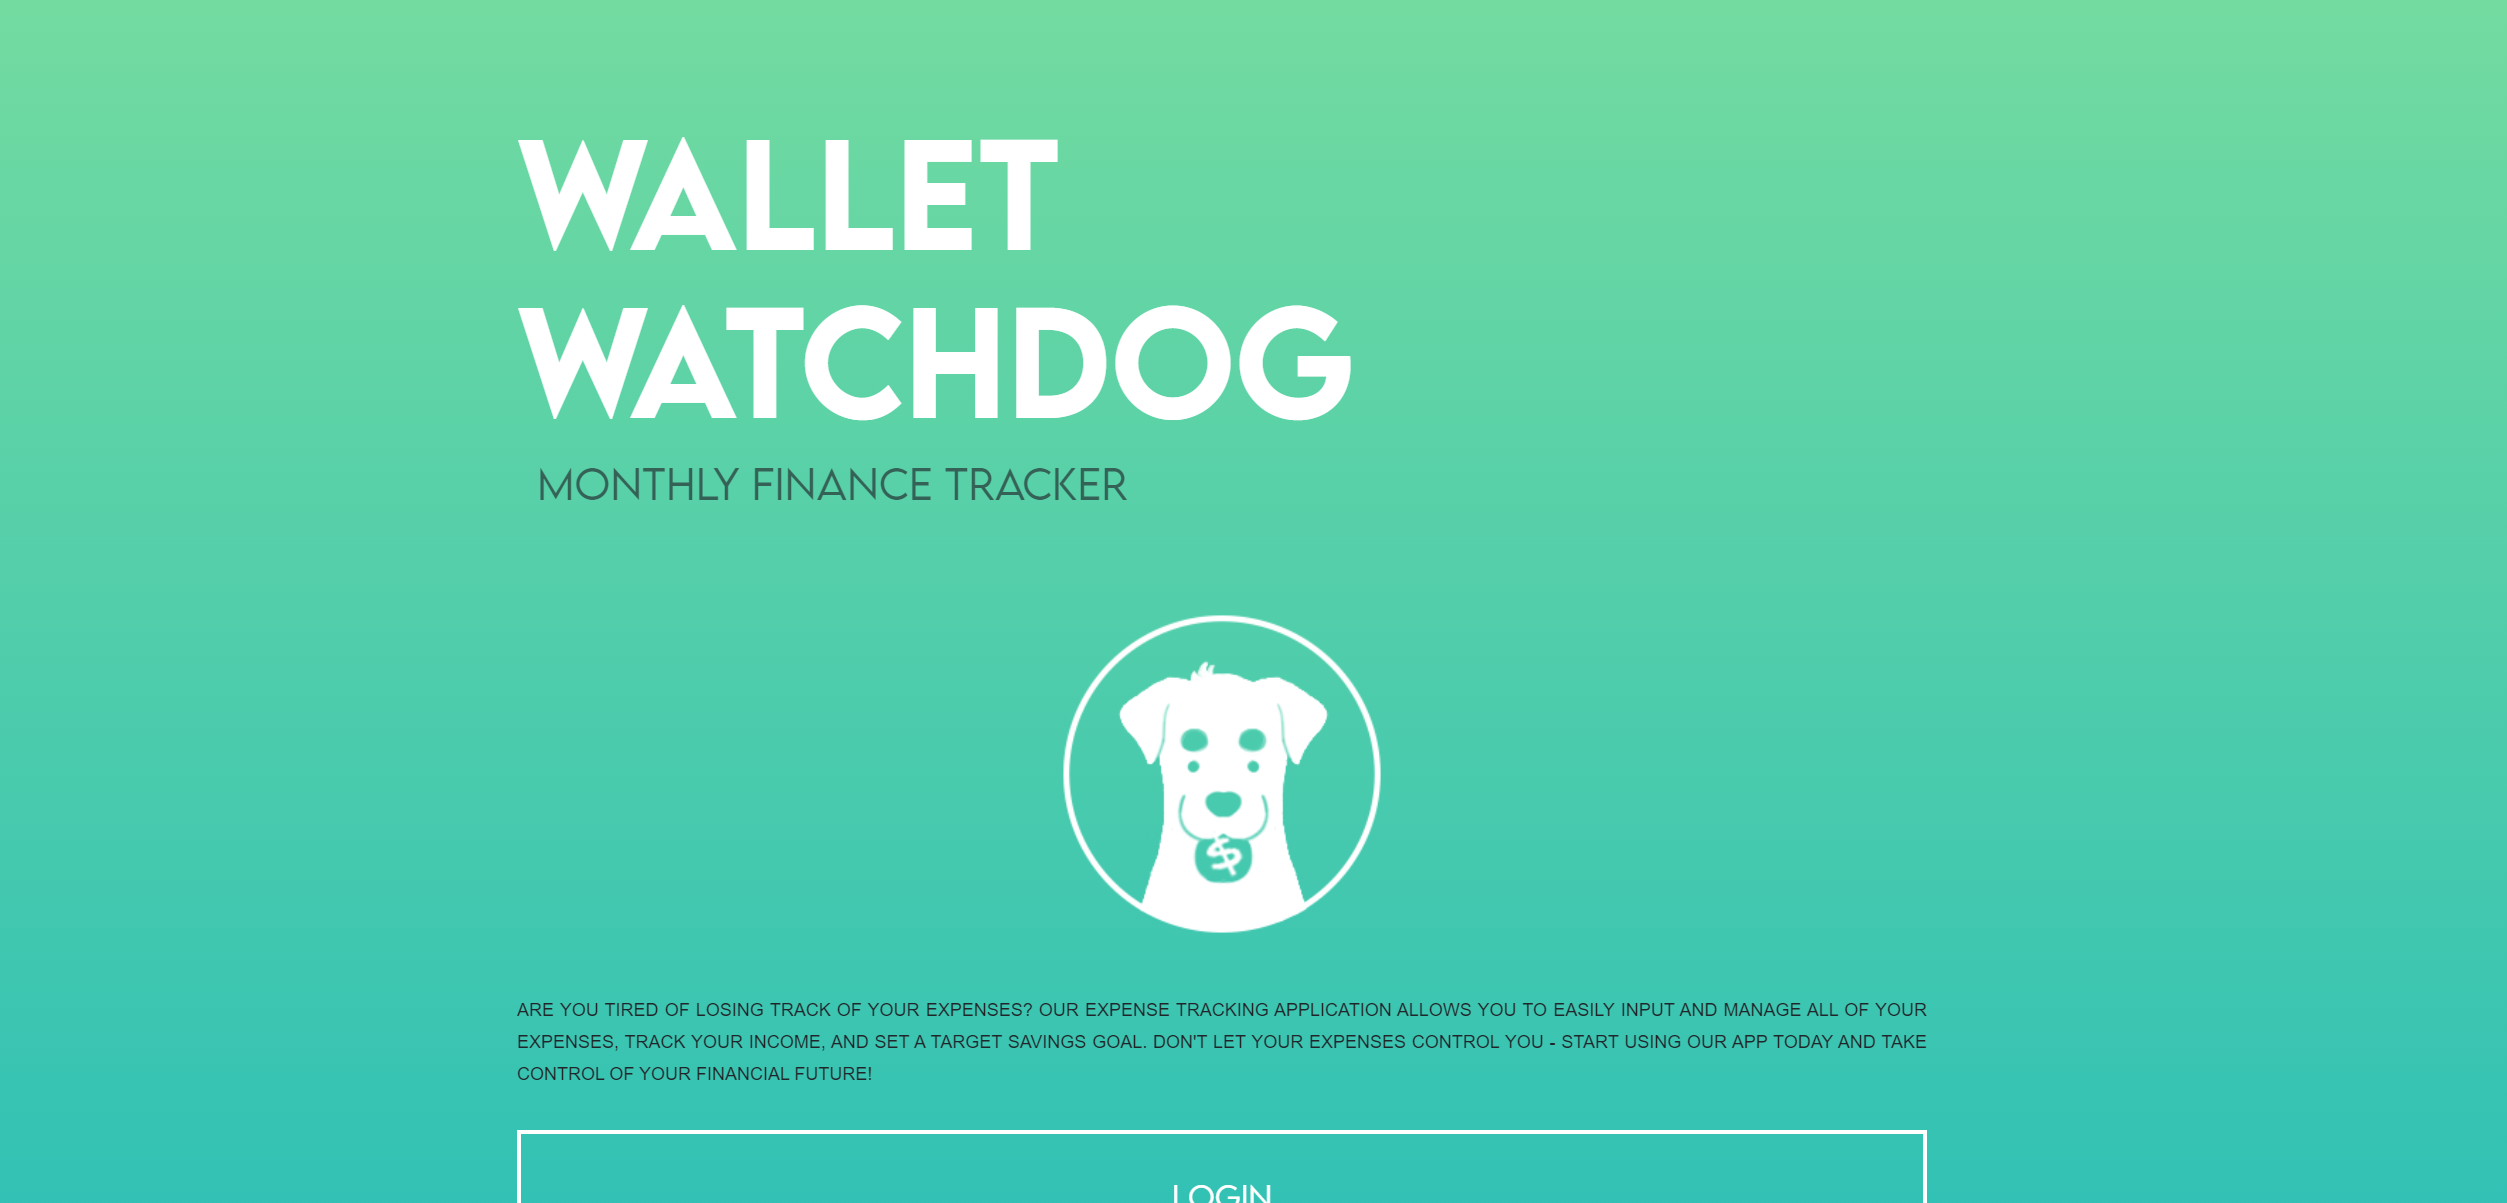 A preview of the deployed application, Wallet Watchdog